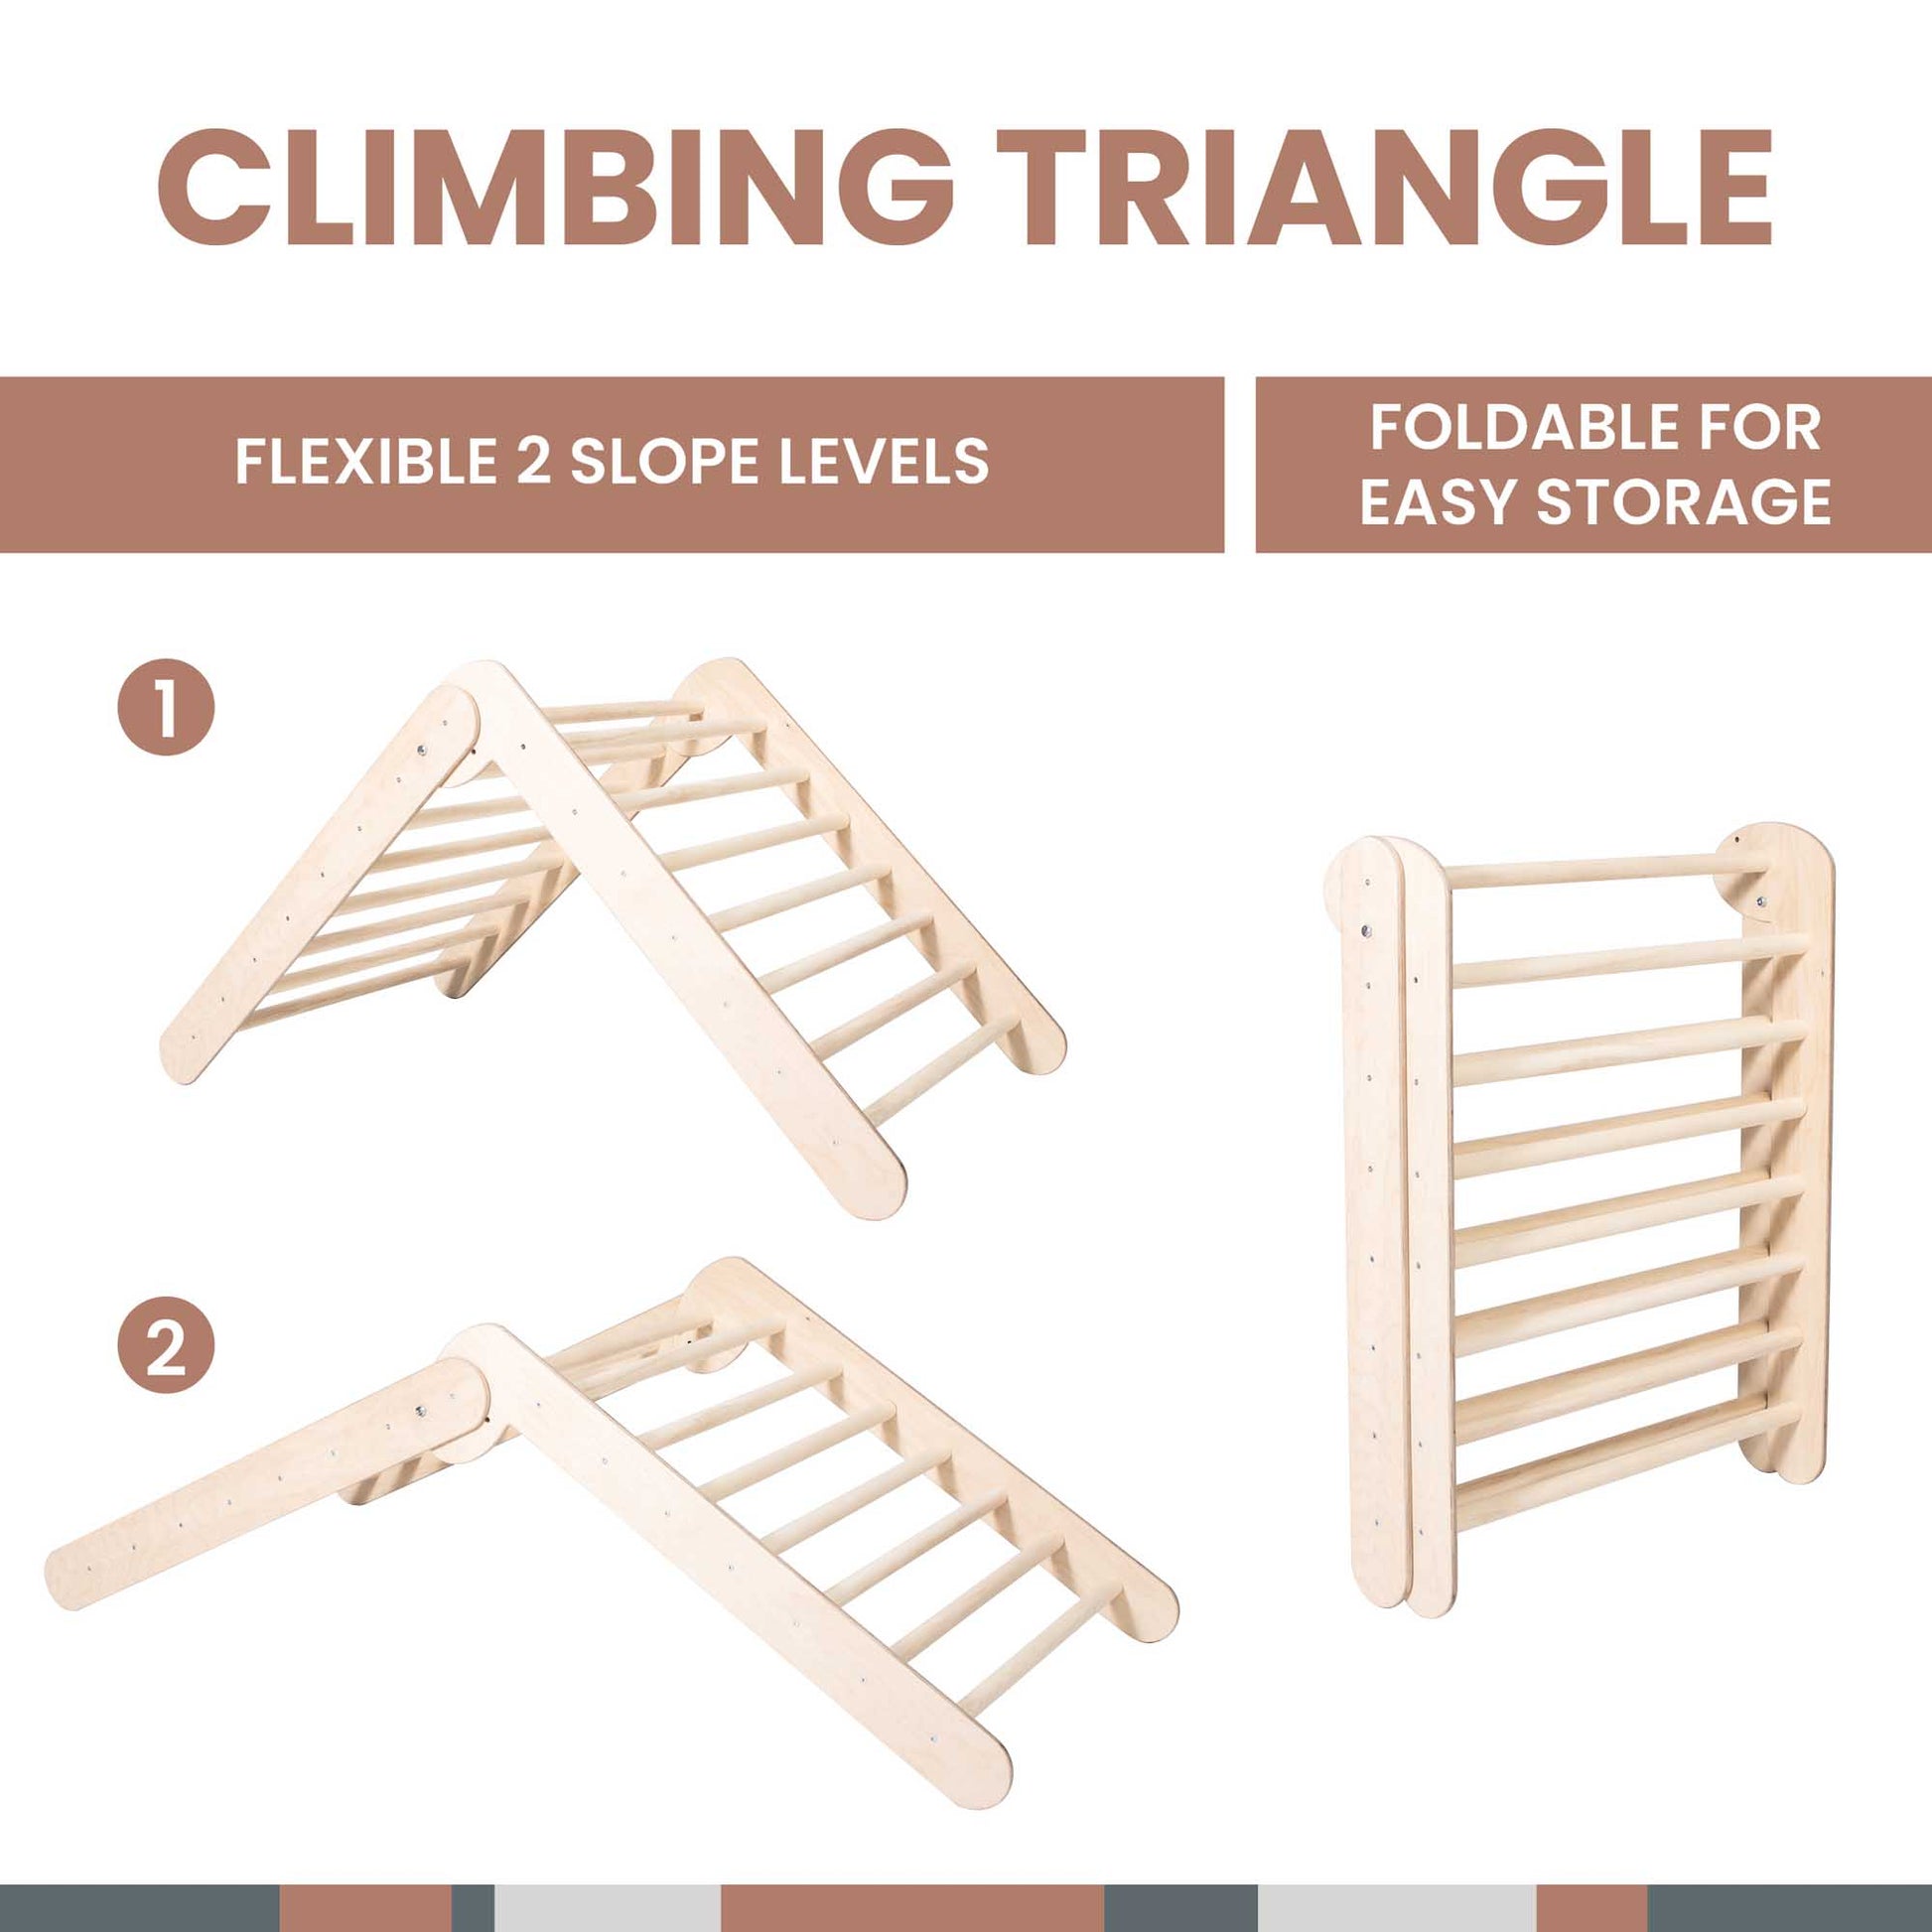 The Foldable climbing triangle + 2-in-1 cube / table and chair + a ramp is a versatile indoor climbing set with two shelf levels.